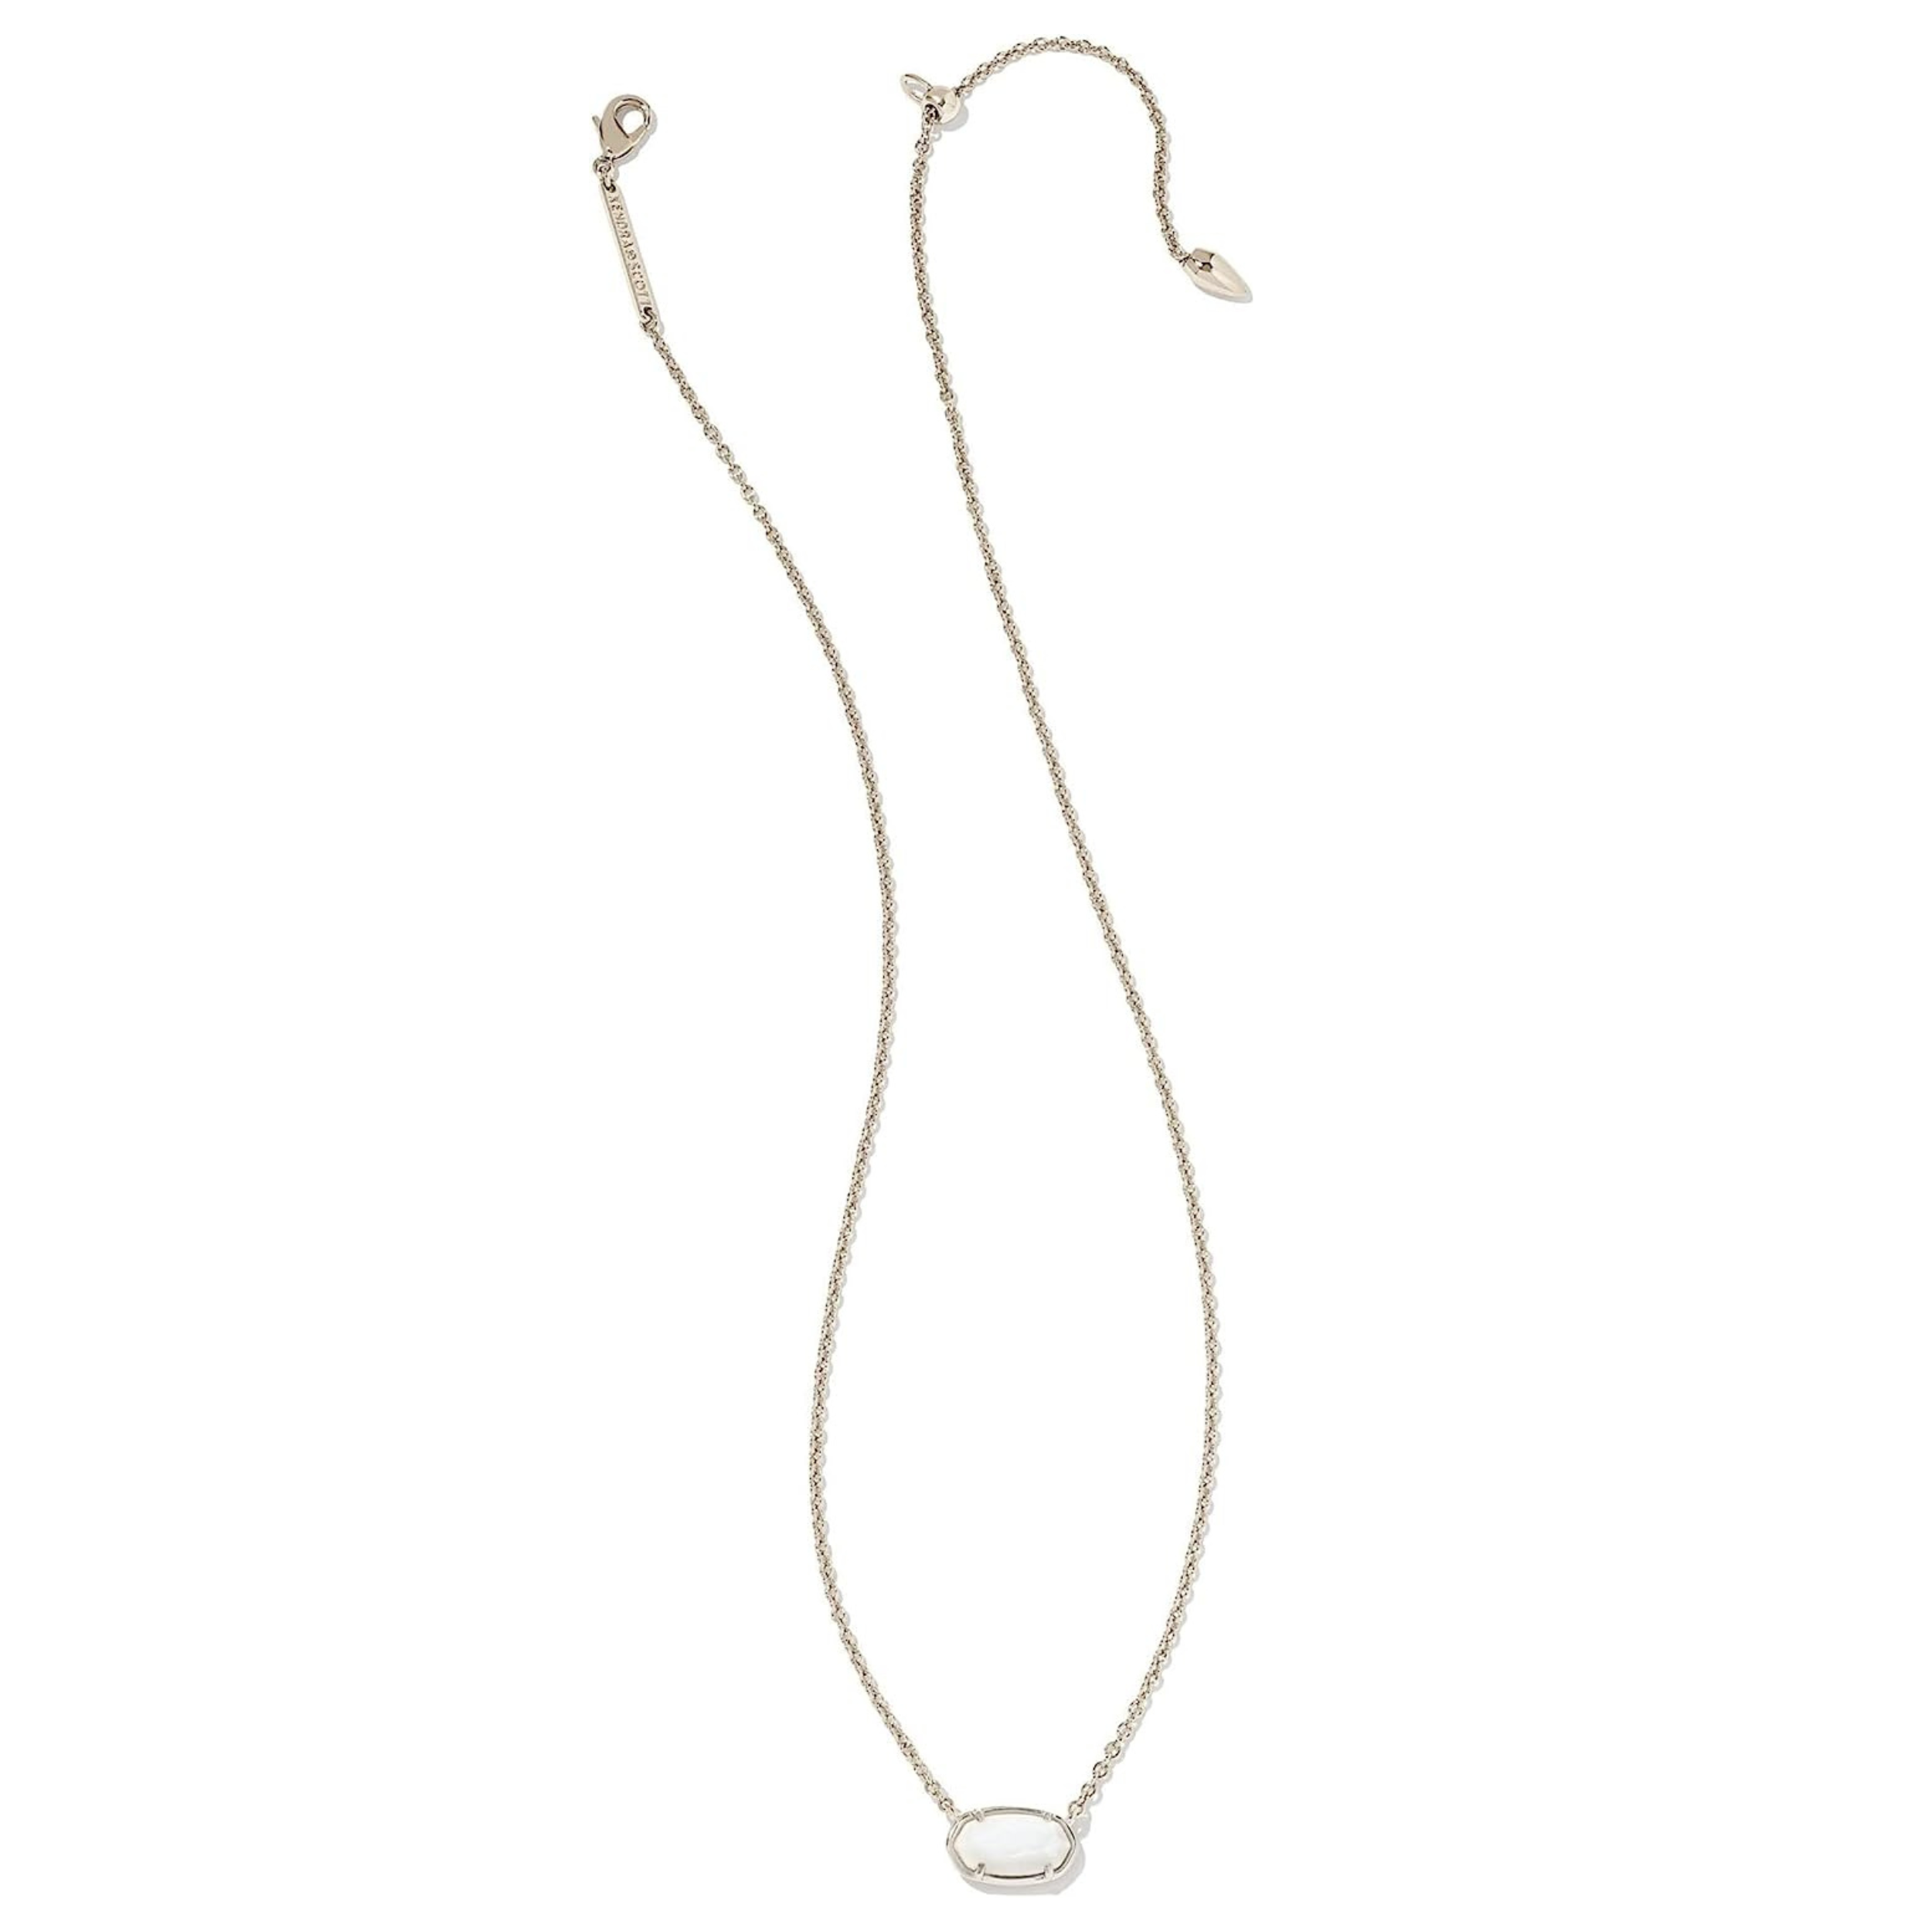 Kendra Scott | Grayson Silver Pendant Necklace in White Mother-of-Pearl - Giddy Up Glamour Boutique